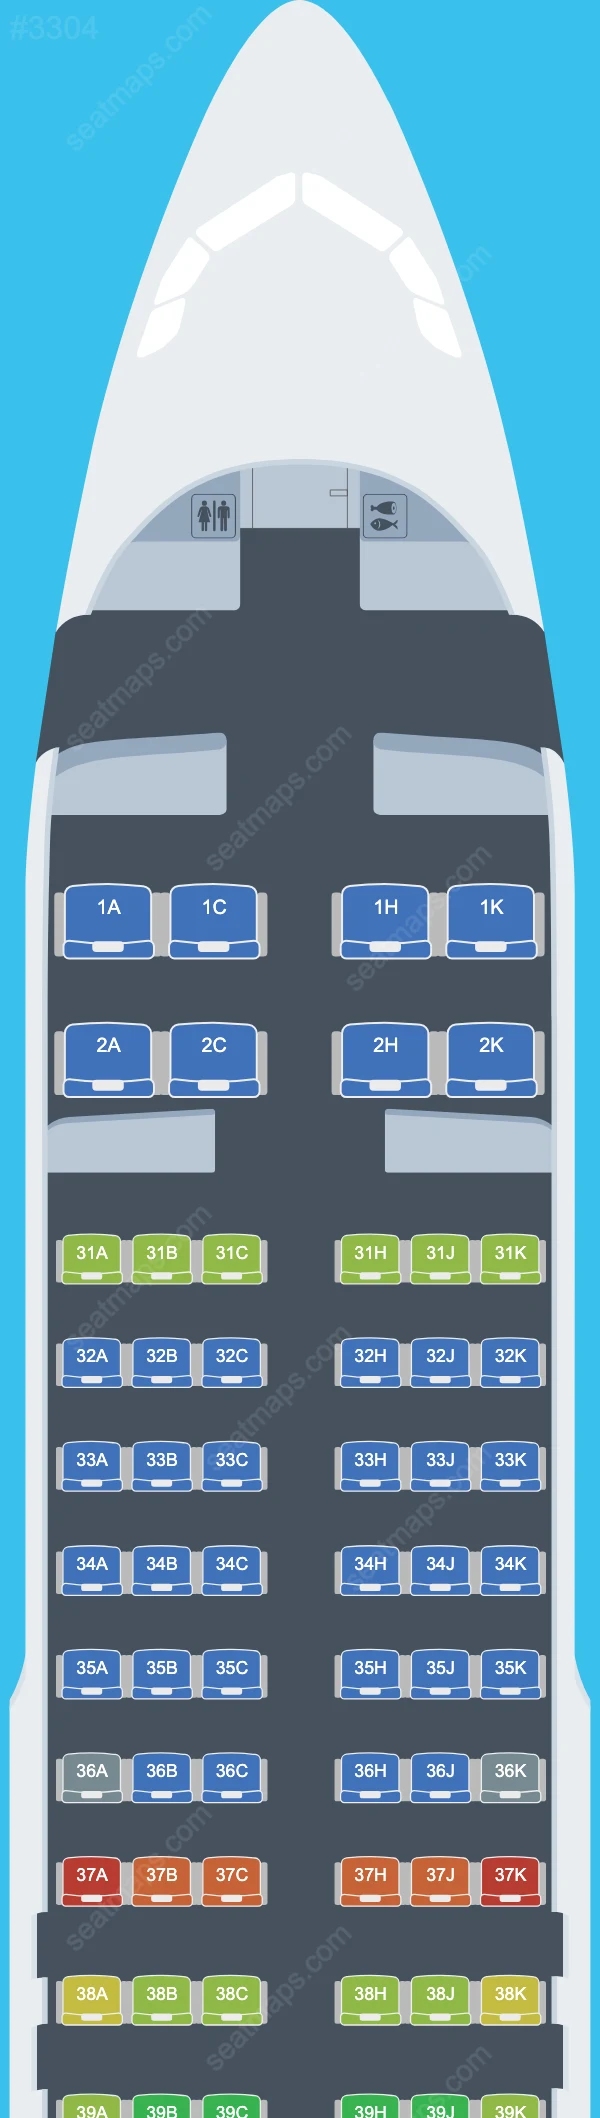 Juneyao Air Airbus A320-200 seatmap mobile preview